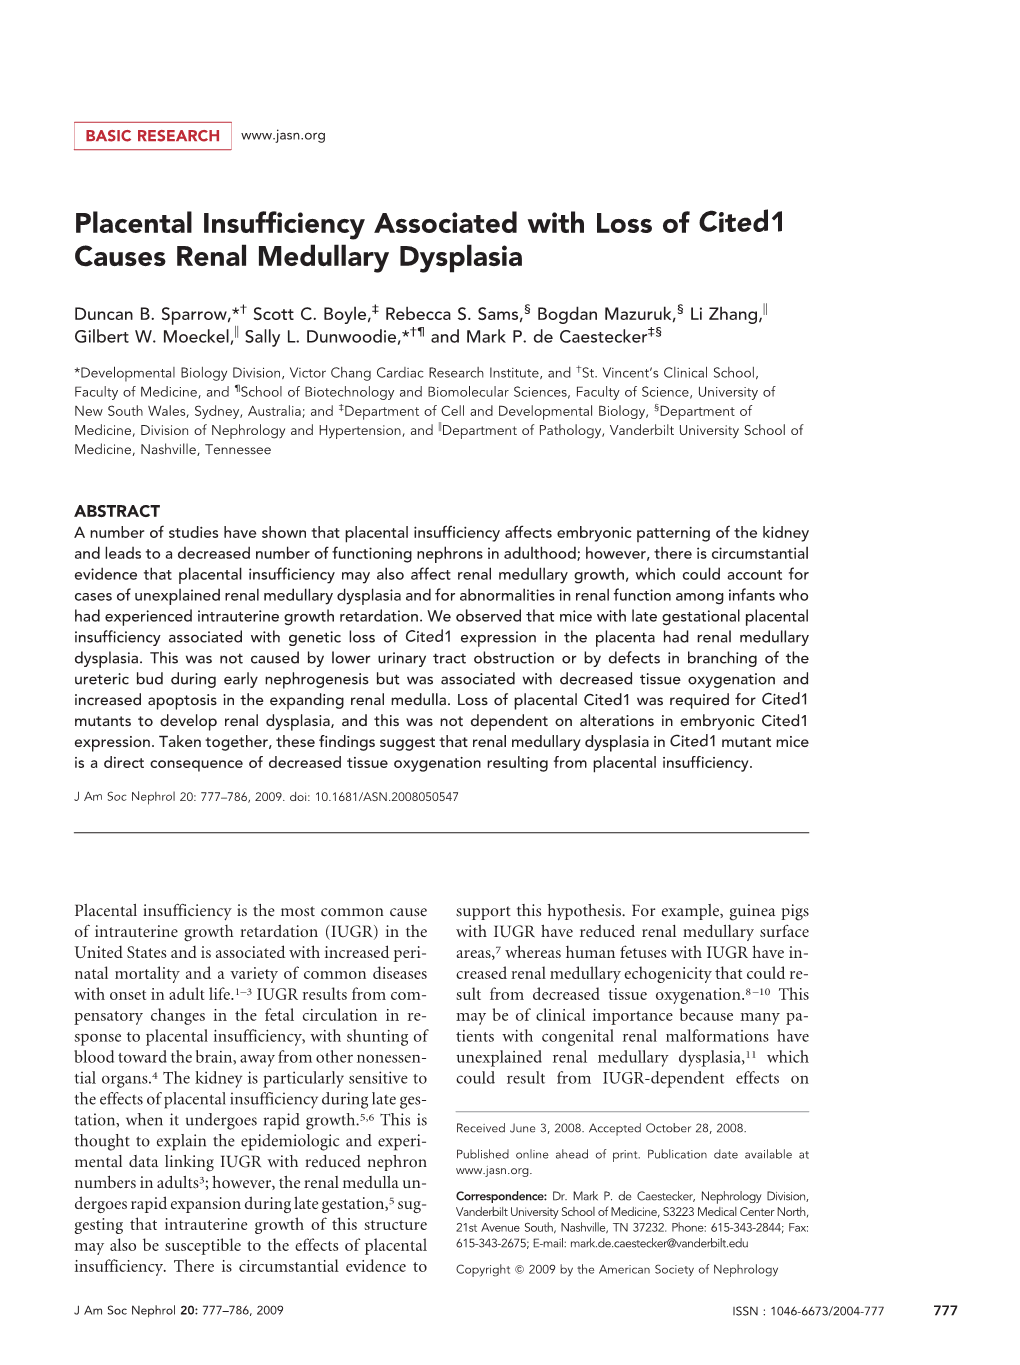 Placental Insufficiency Associated with Loss of Cited1 Causes Renal Medullary Dysplasia